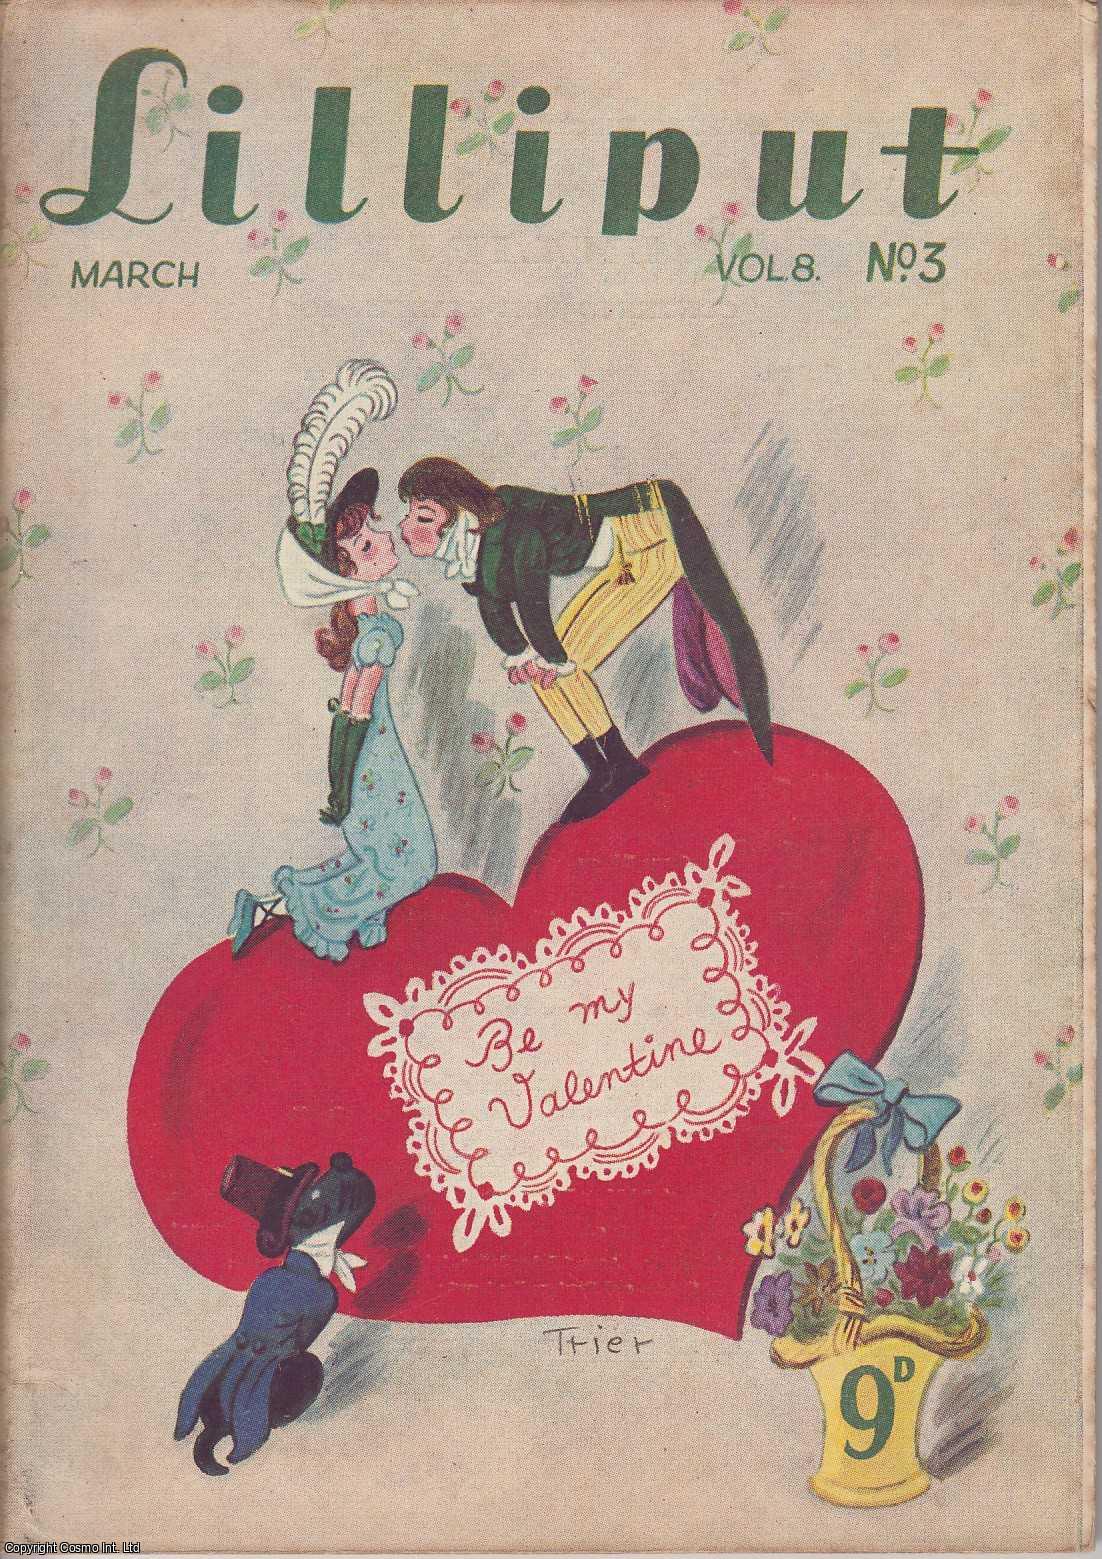 Lilliput - Lilliput Magazine. March 1941. Vol.8 no.3 Issue no.45. Kym Horwood, Eric Stephenson, Ian Coster, Crichton Porteous, and other pieces.